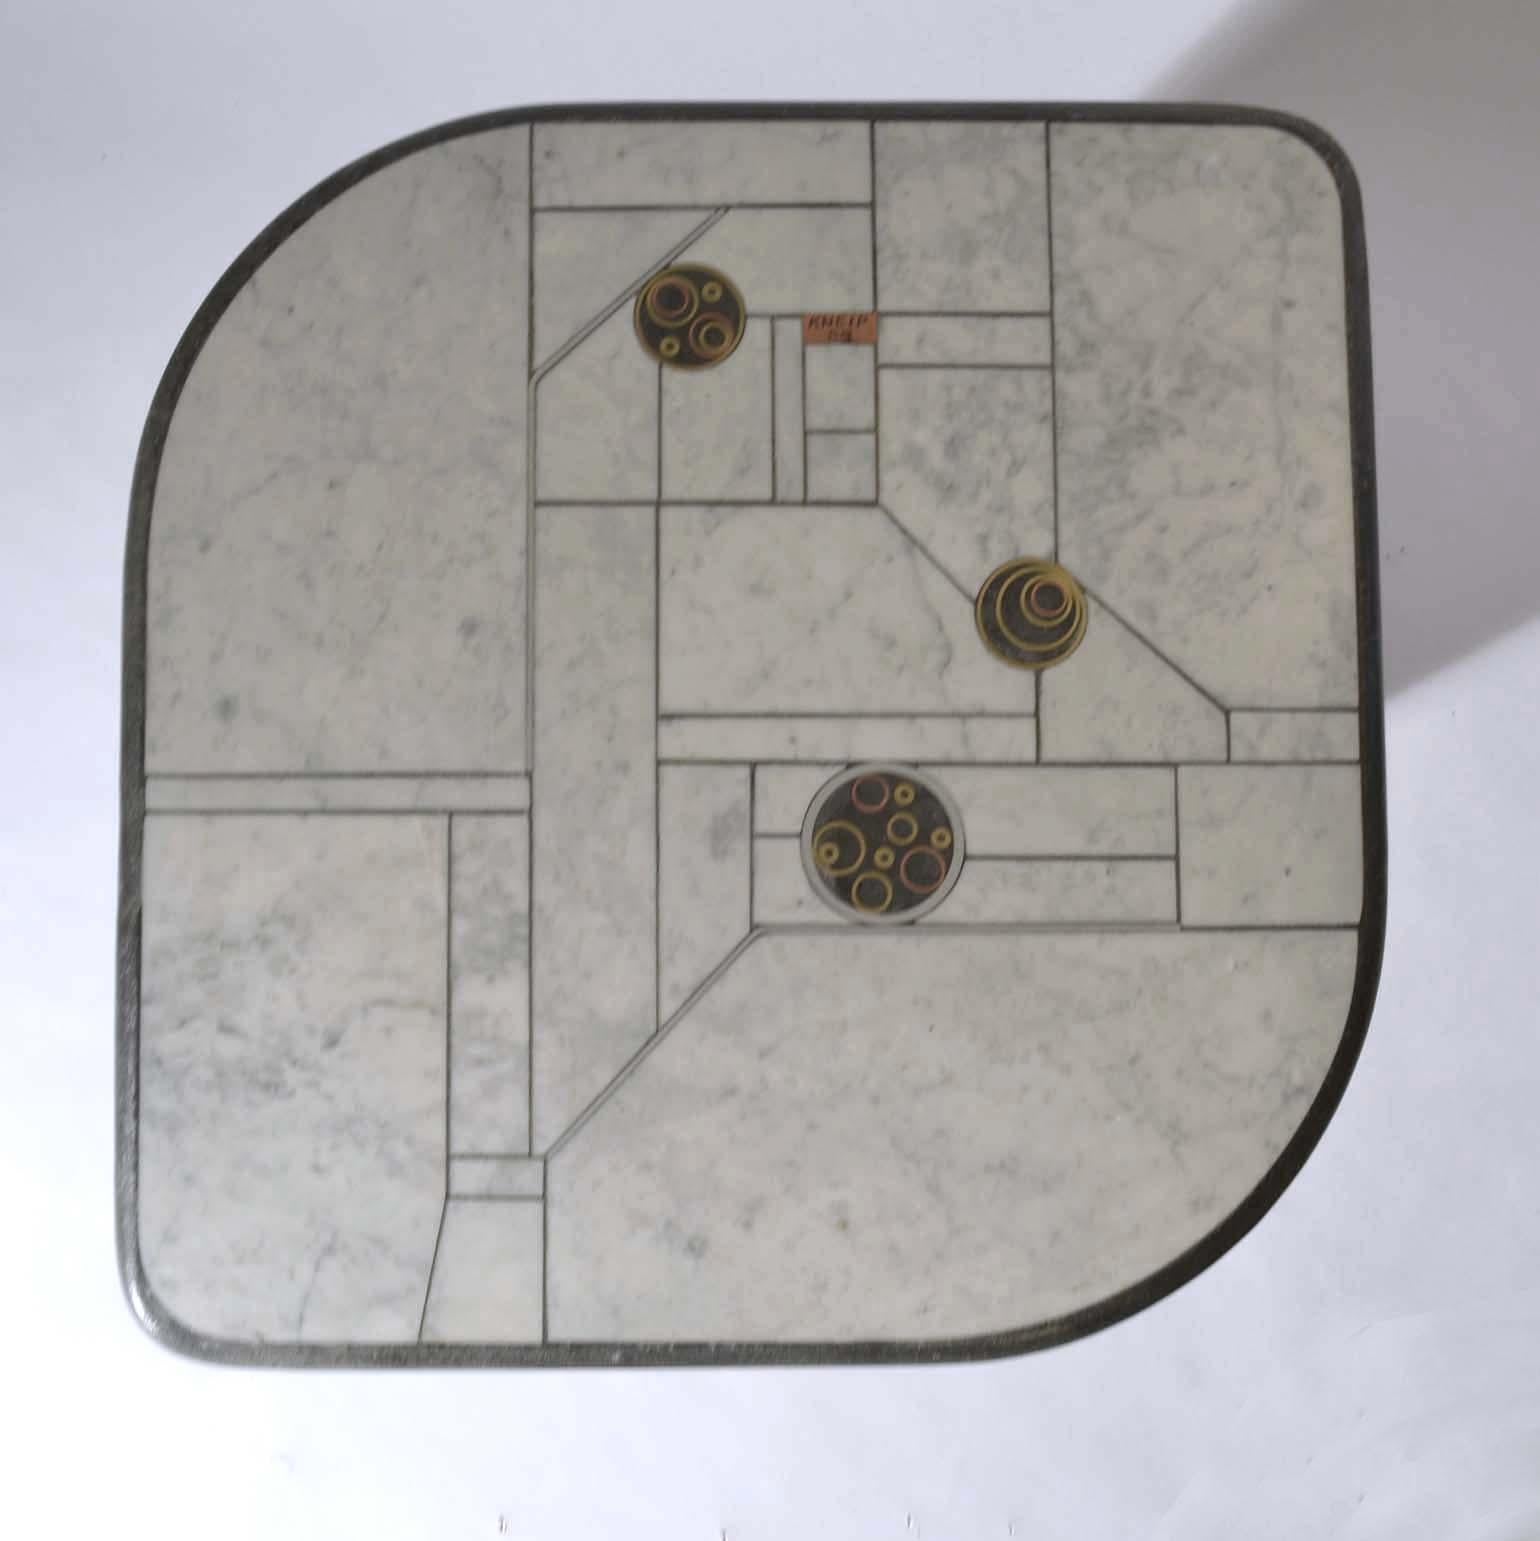 Two sculptural mosaic side tables on alternating heights have an unusual shape. The tables are inlaid with white Carrara marble and pieces of brass and copper. Designed by the Dutch sculptor, mosaic artist and painter Paul Kingma, The Hague